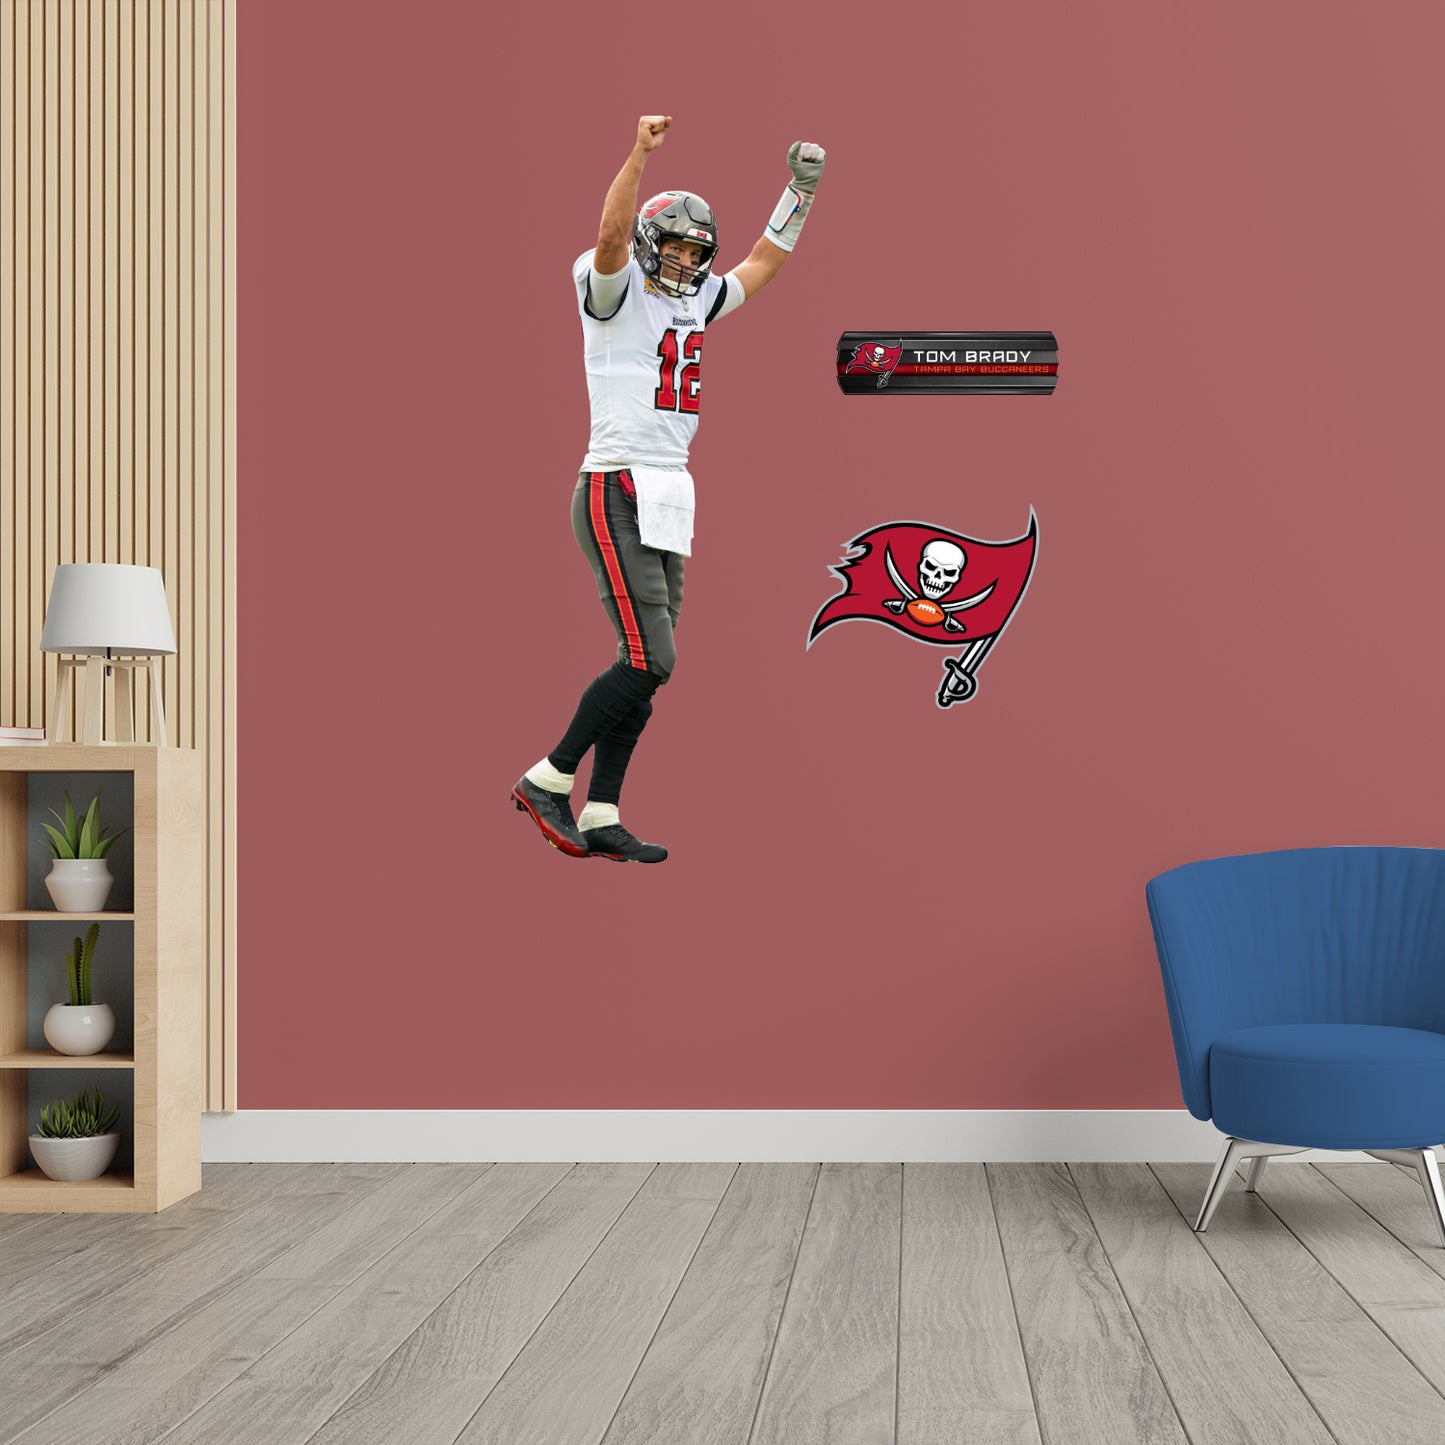 Tom Brady Super Bowl LV for Tampa Bay Buccaneers - NFL Removable Wall Decal Life-Size Athlete + 2 Wall Decals 49W x 78H